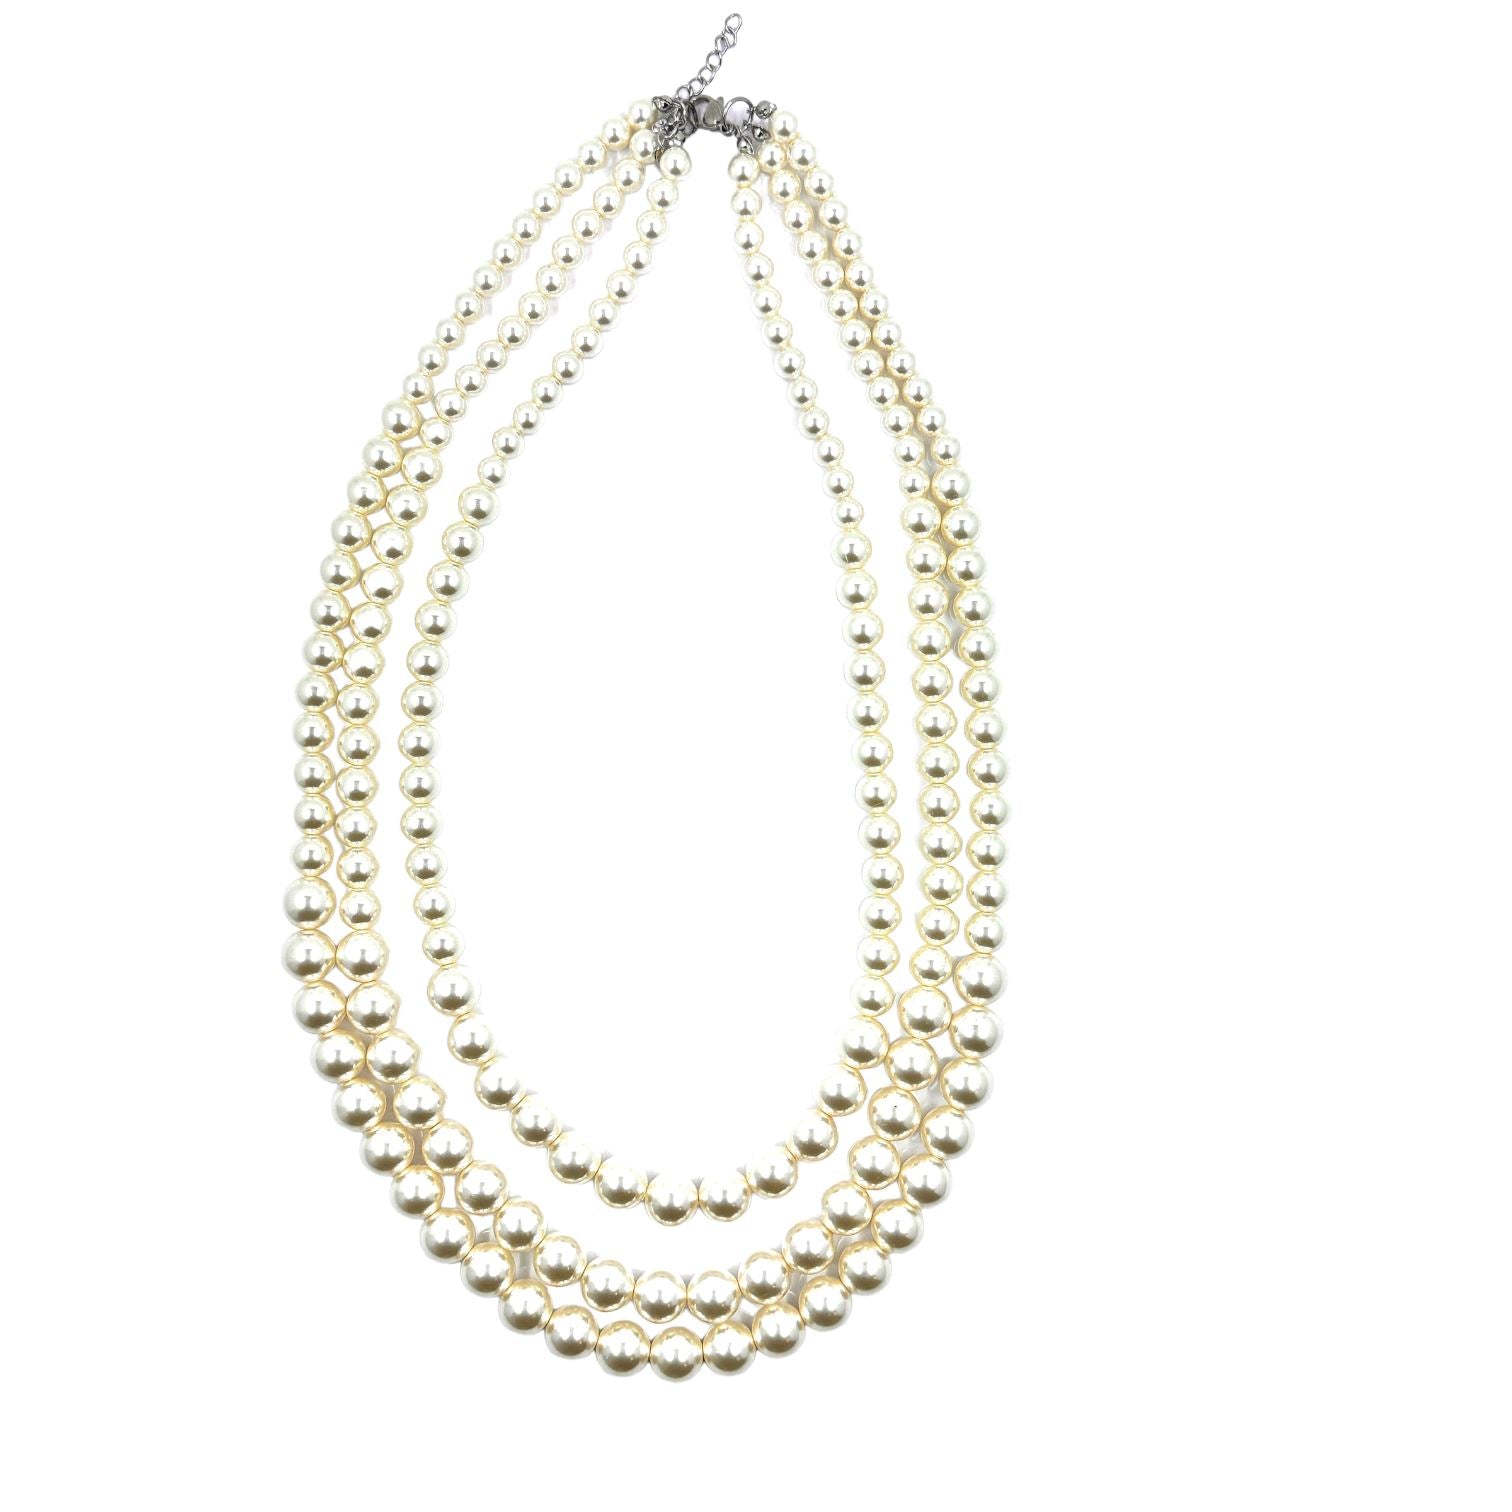 Necklace with triple strand of Natural Pearls, L 44 cm approx. Susta in  Steel.